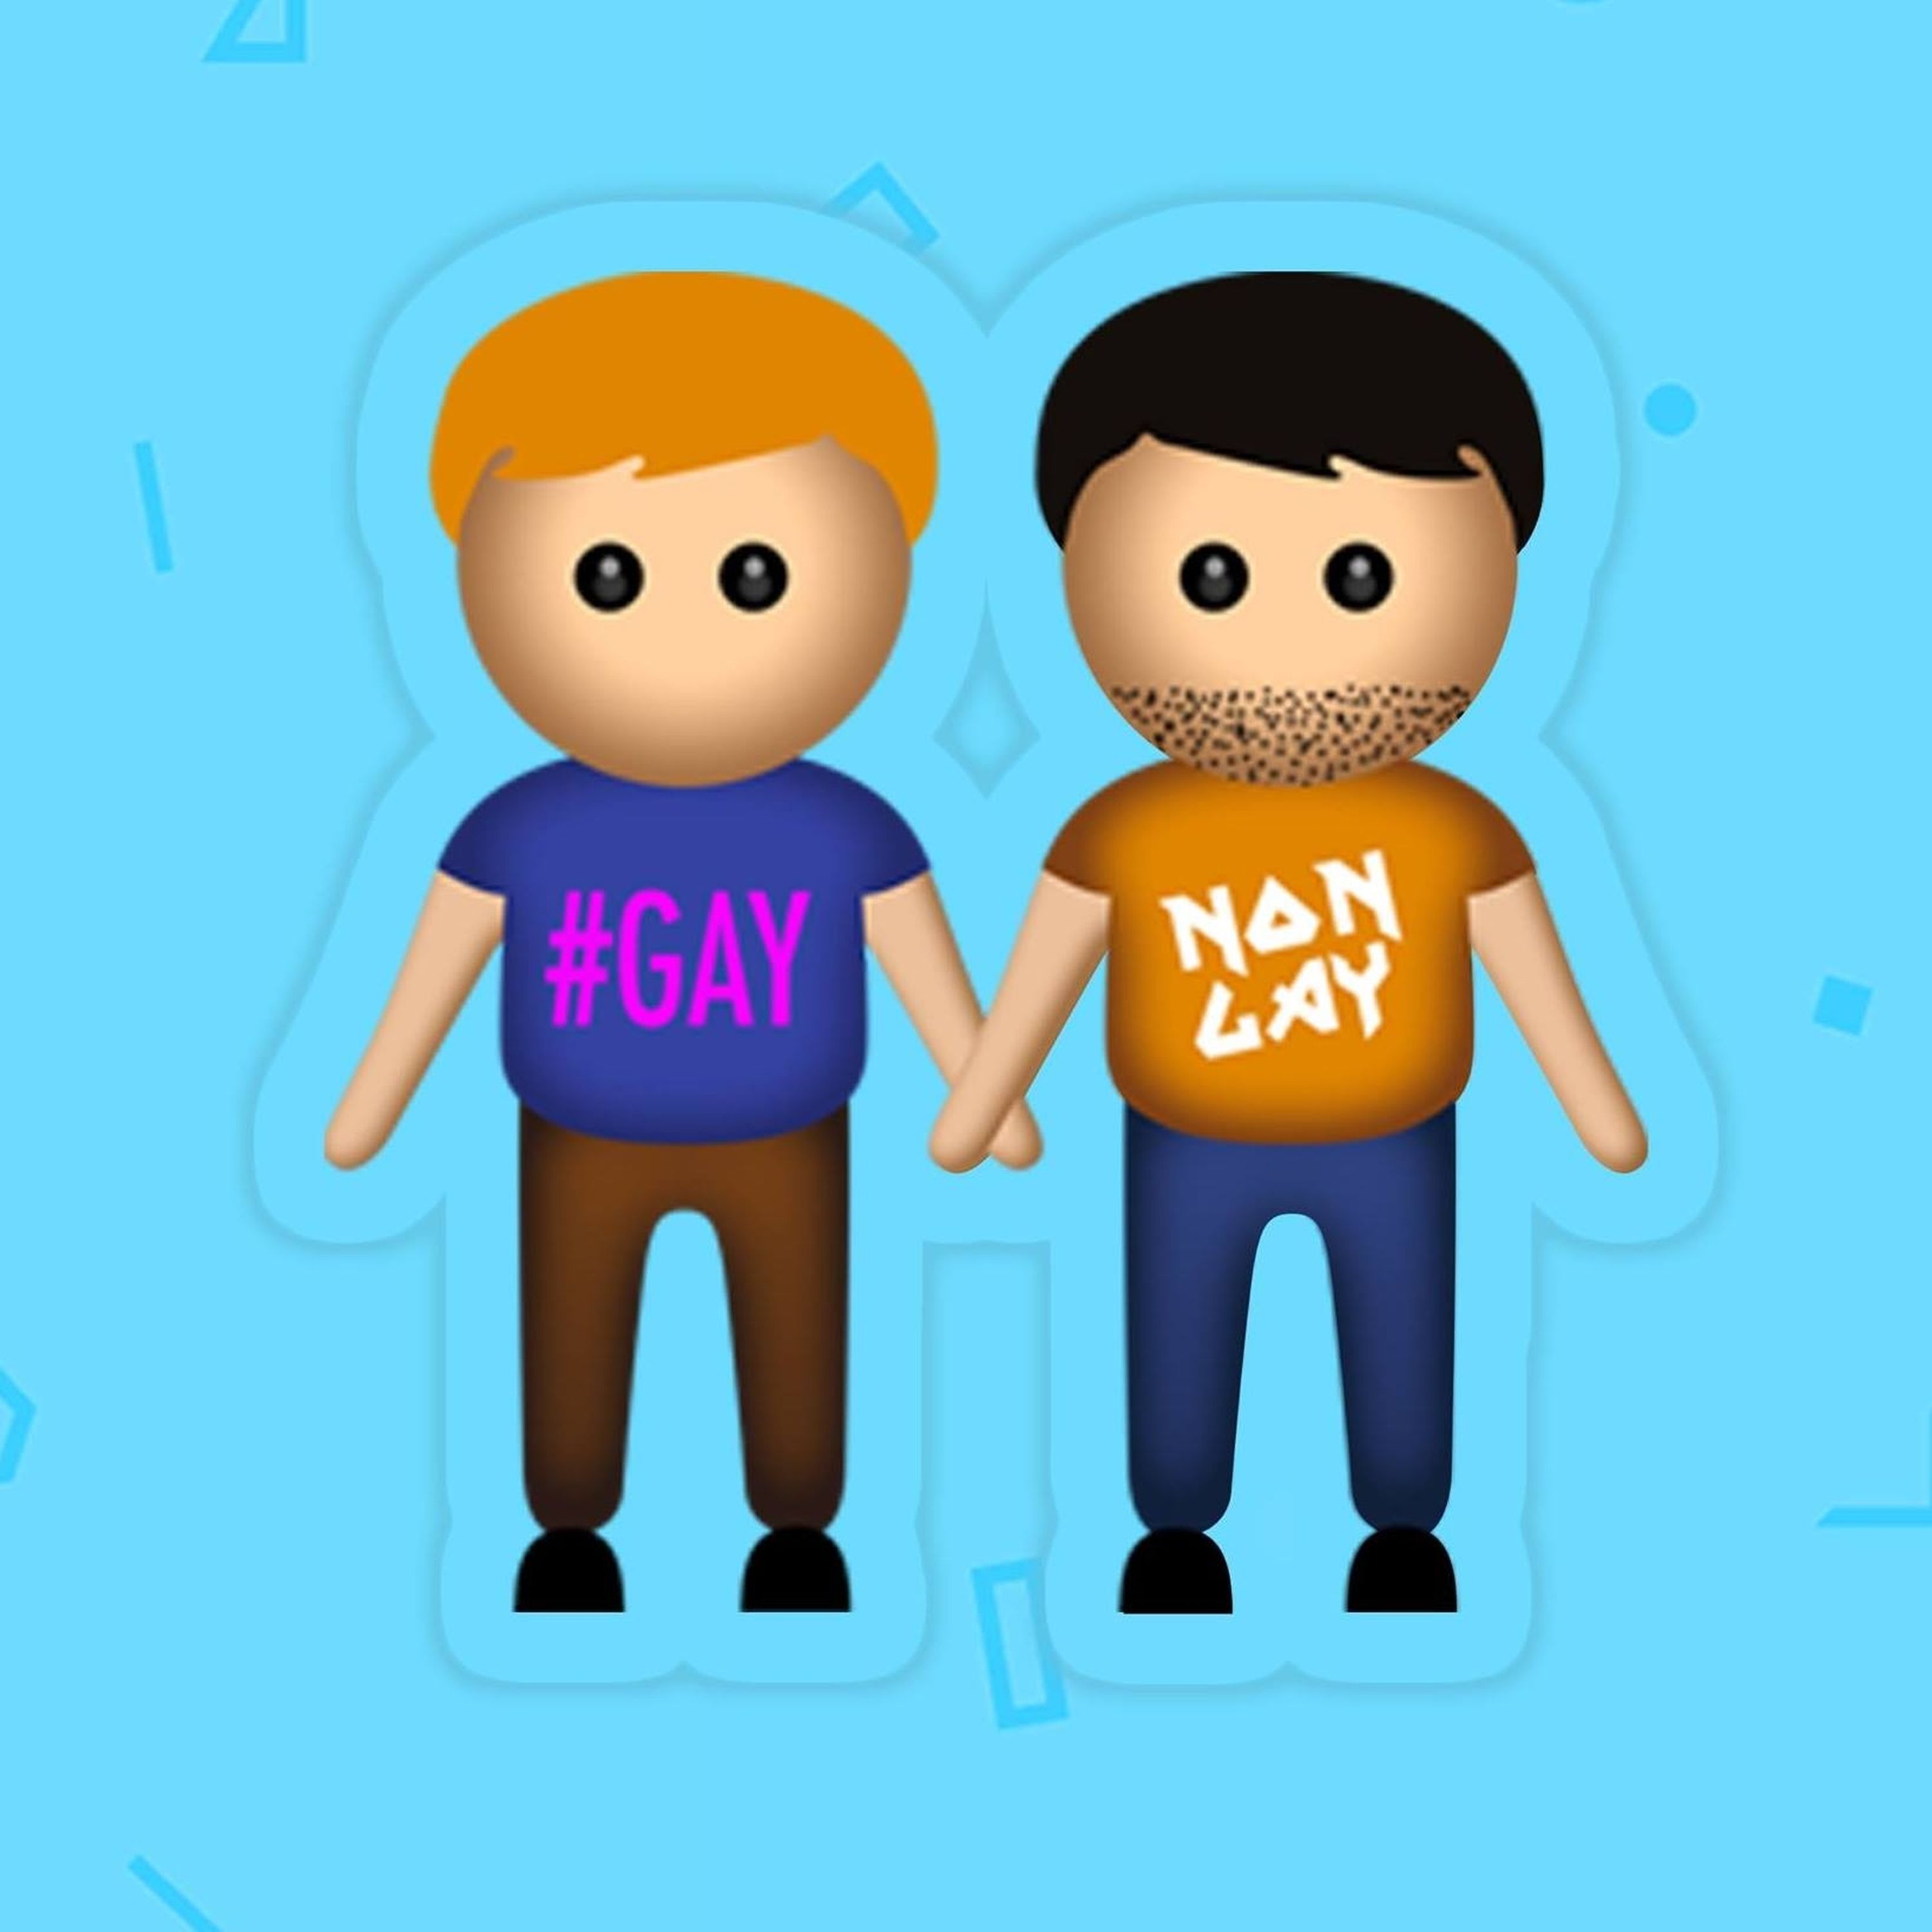 cover art for A Gay and a Non Gay douche to say LGBT+ rights